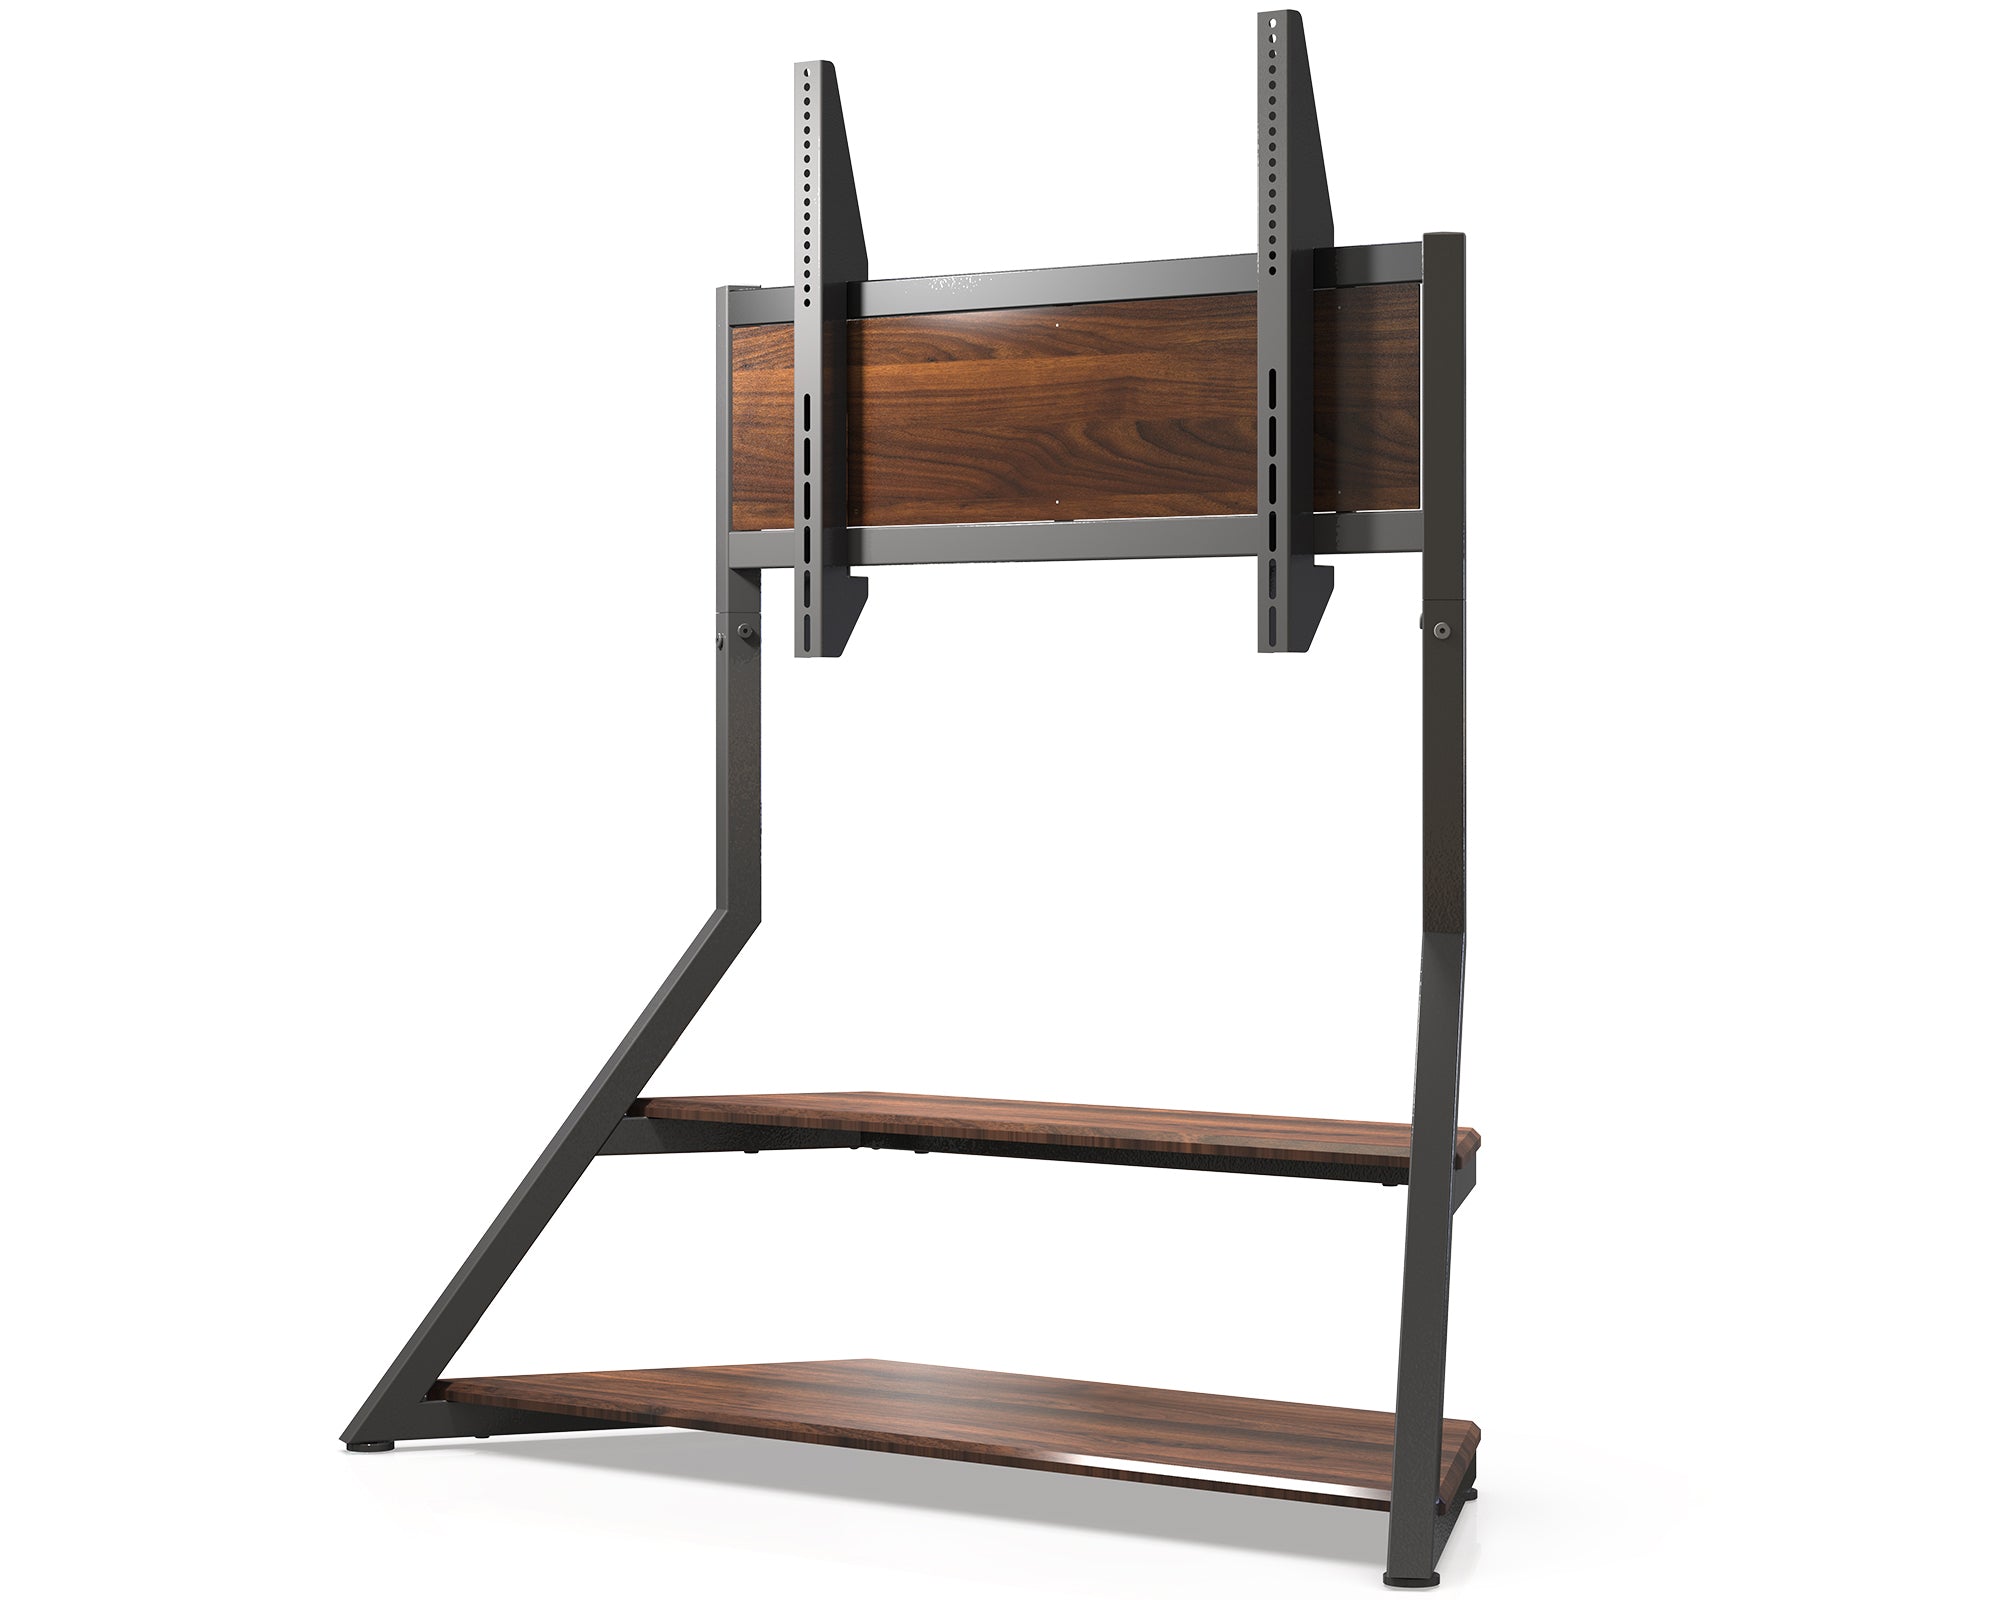 Floor TV stand Eiffel series 75-100 inches